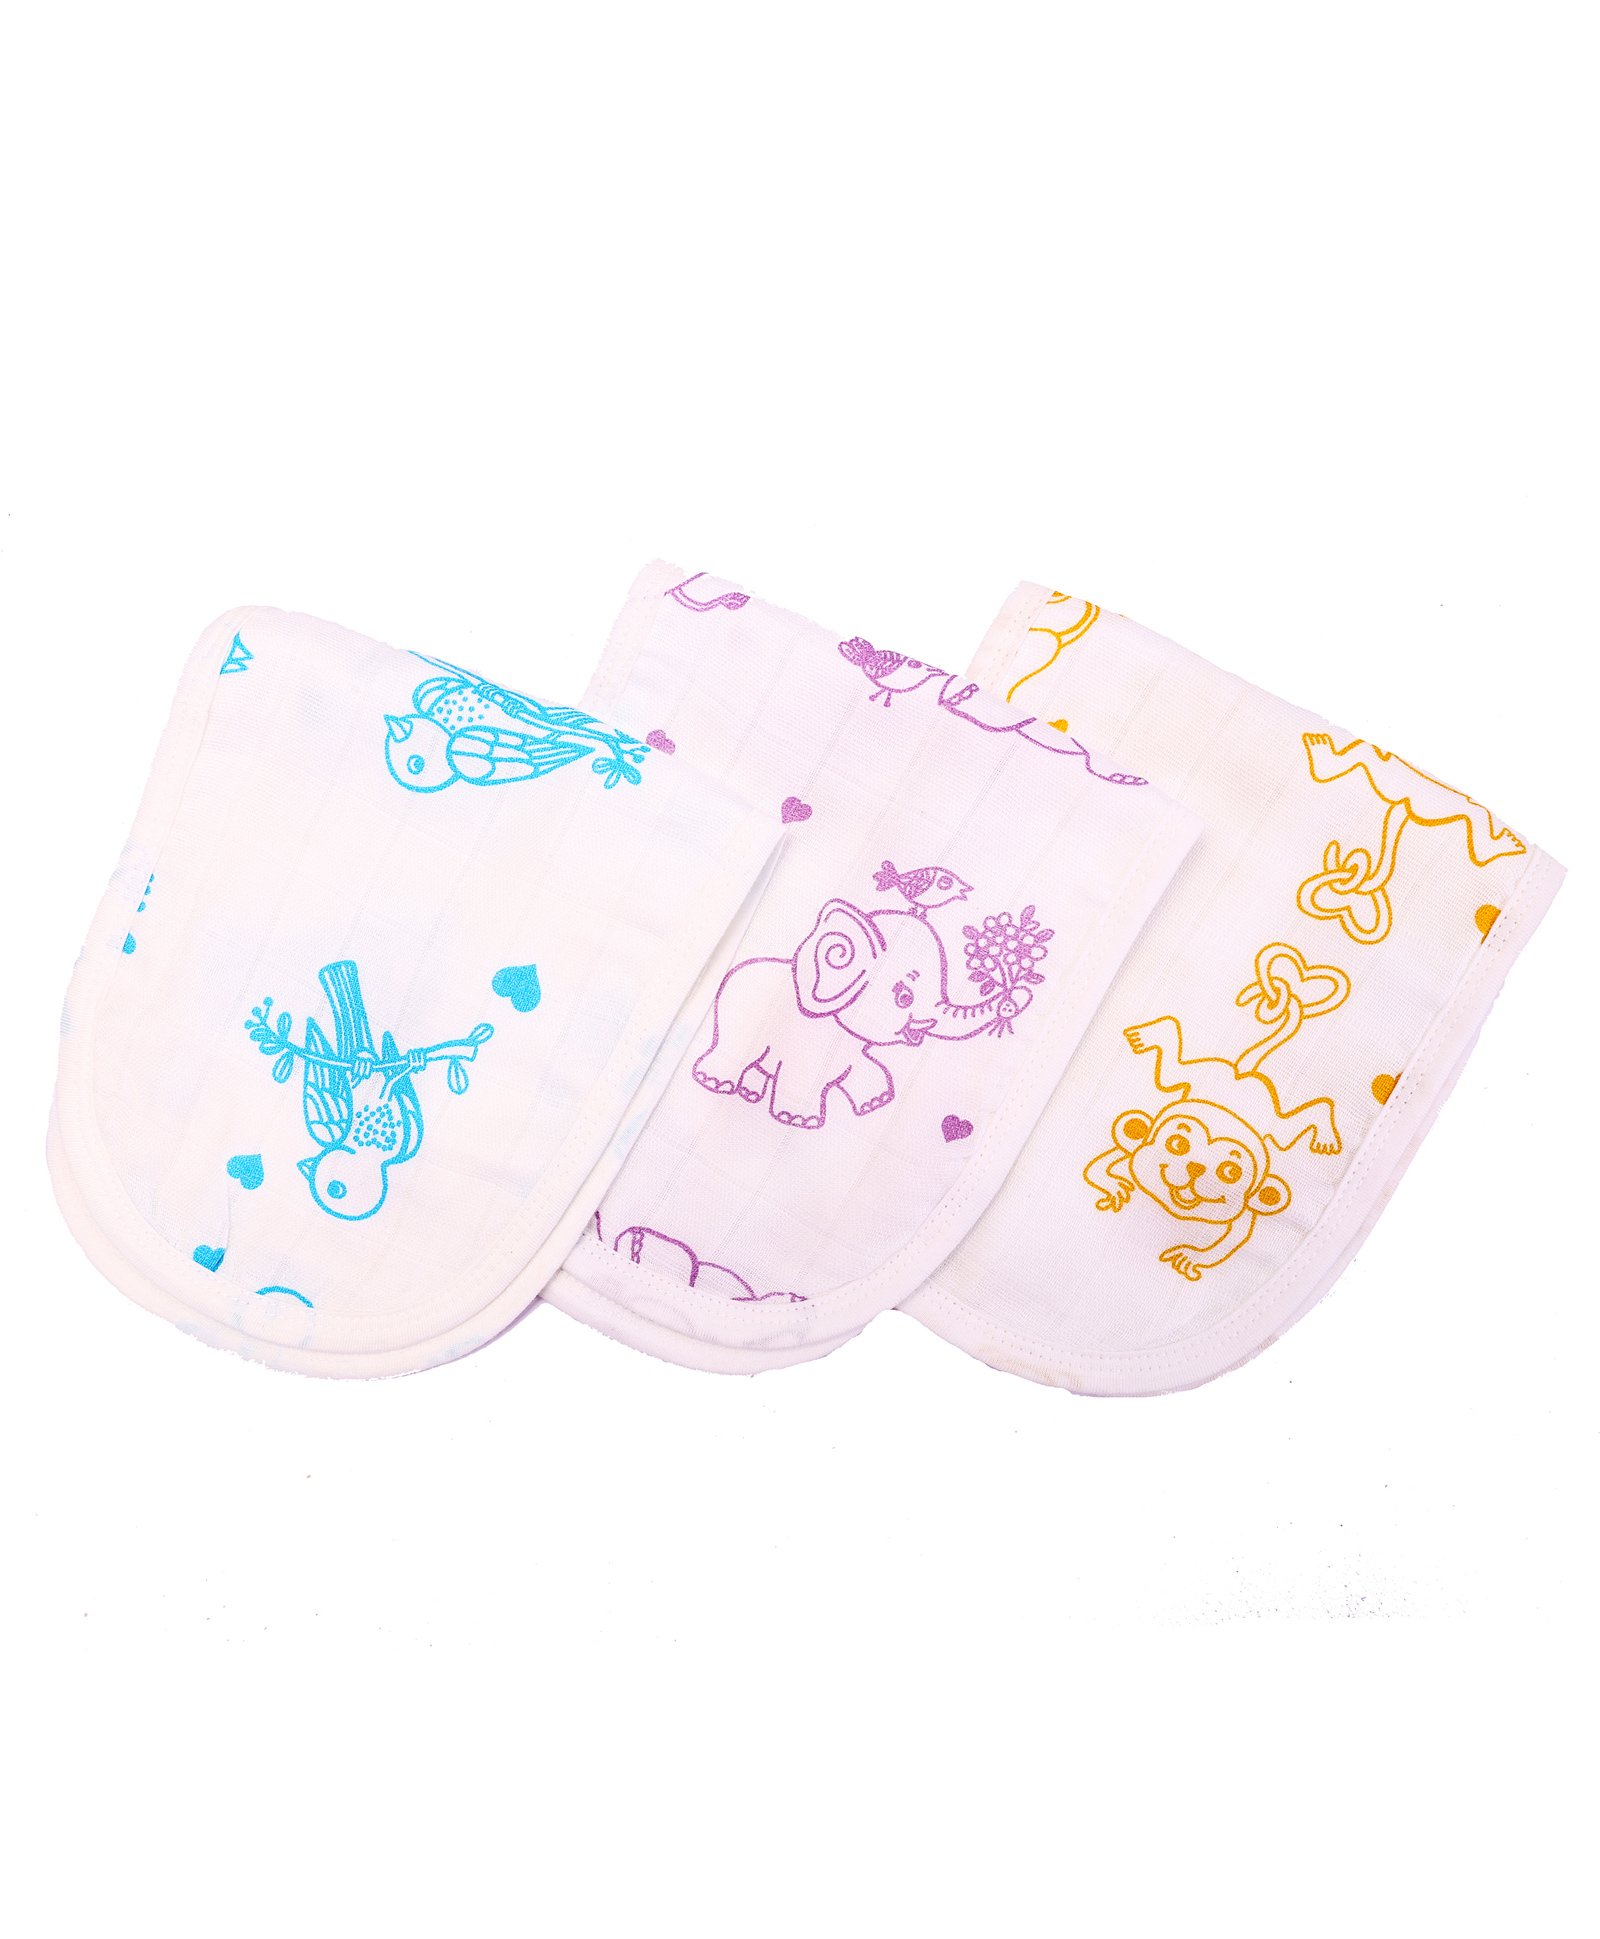 Kaarpas Premium Organic Cotton Muslin Burp Cloth Pack Of 3 Adorable Animals Online In India Buy At Best Price From Firstcry Com 1249521 Know answer of question : inr